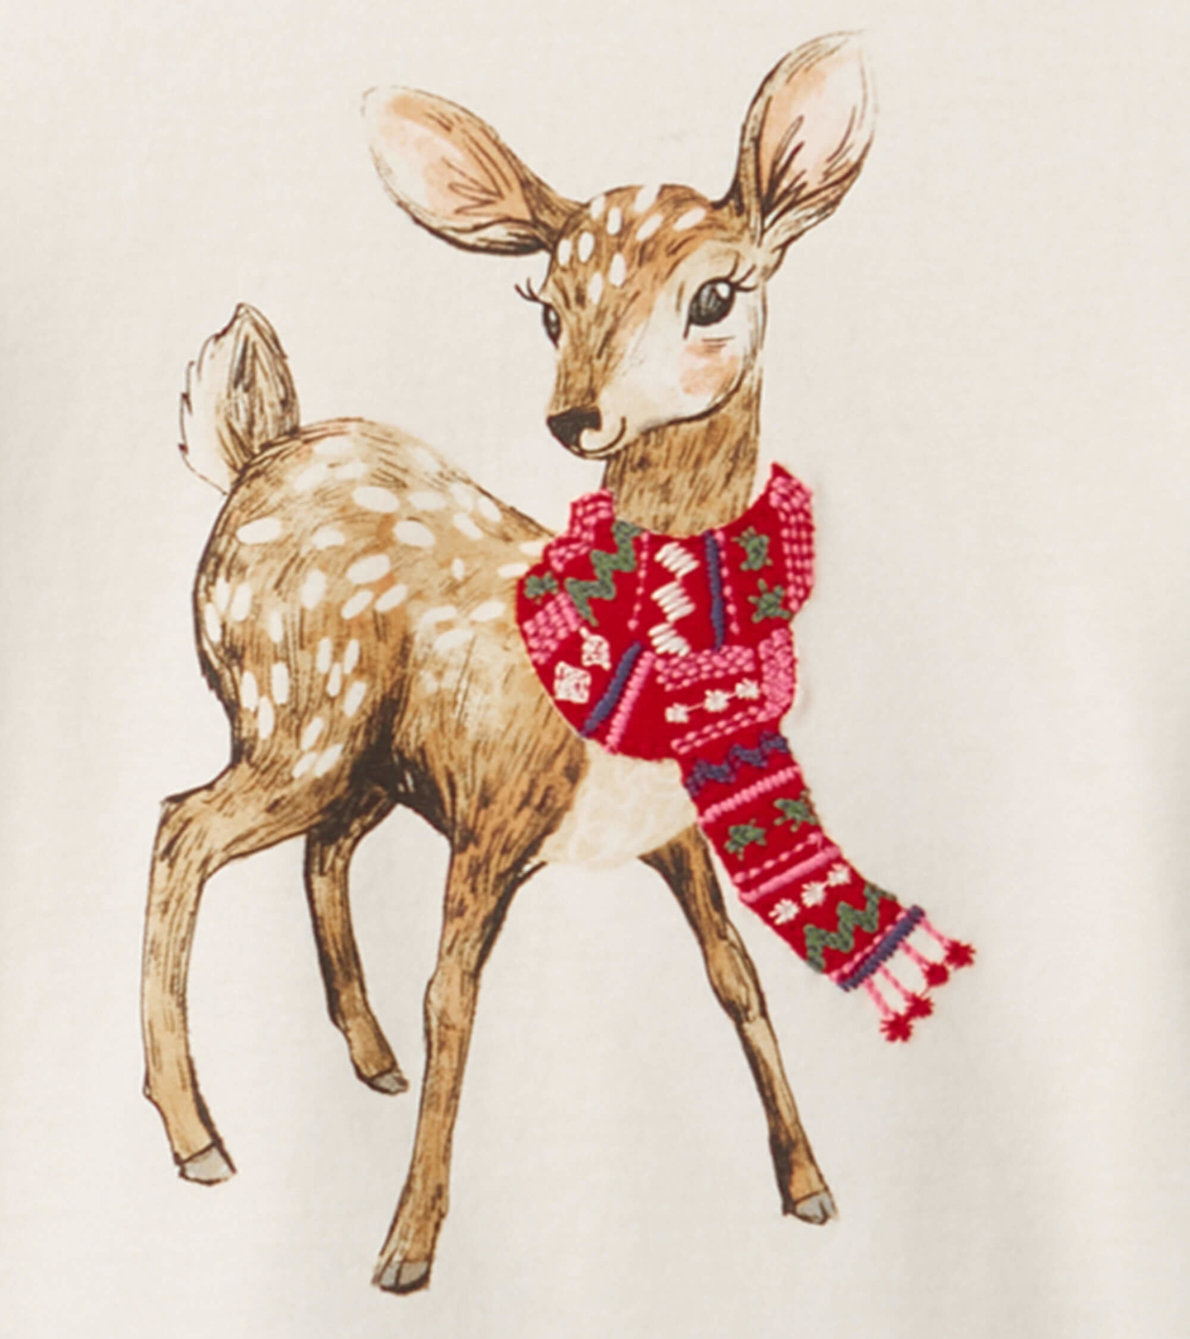 View larger image of Christmas Reindeer Long Sleeve T-Shirt